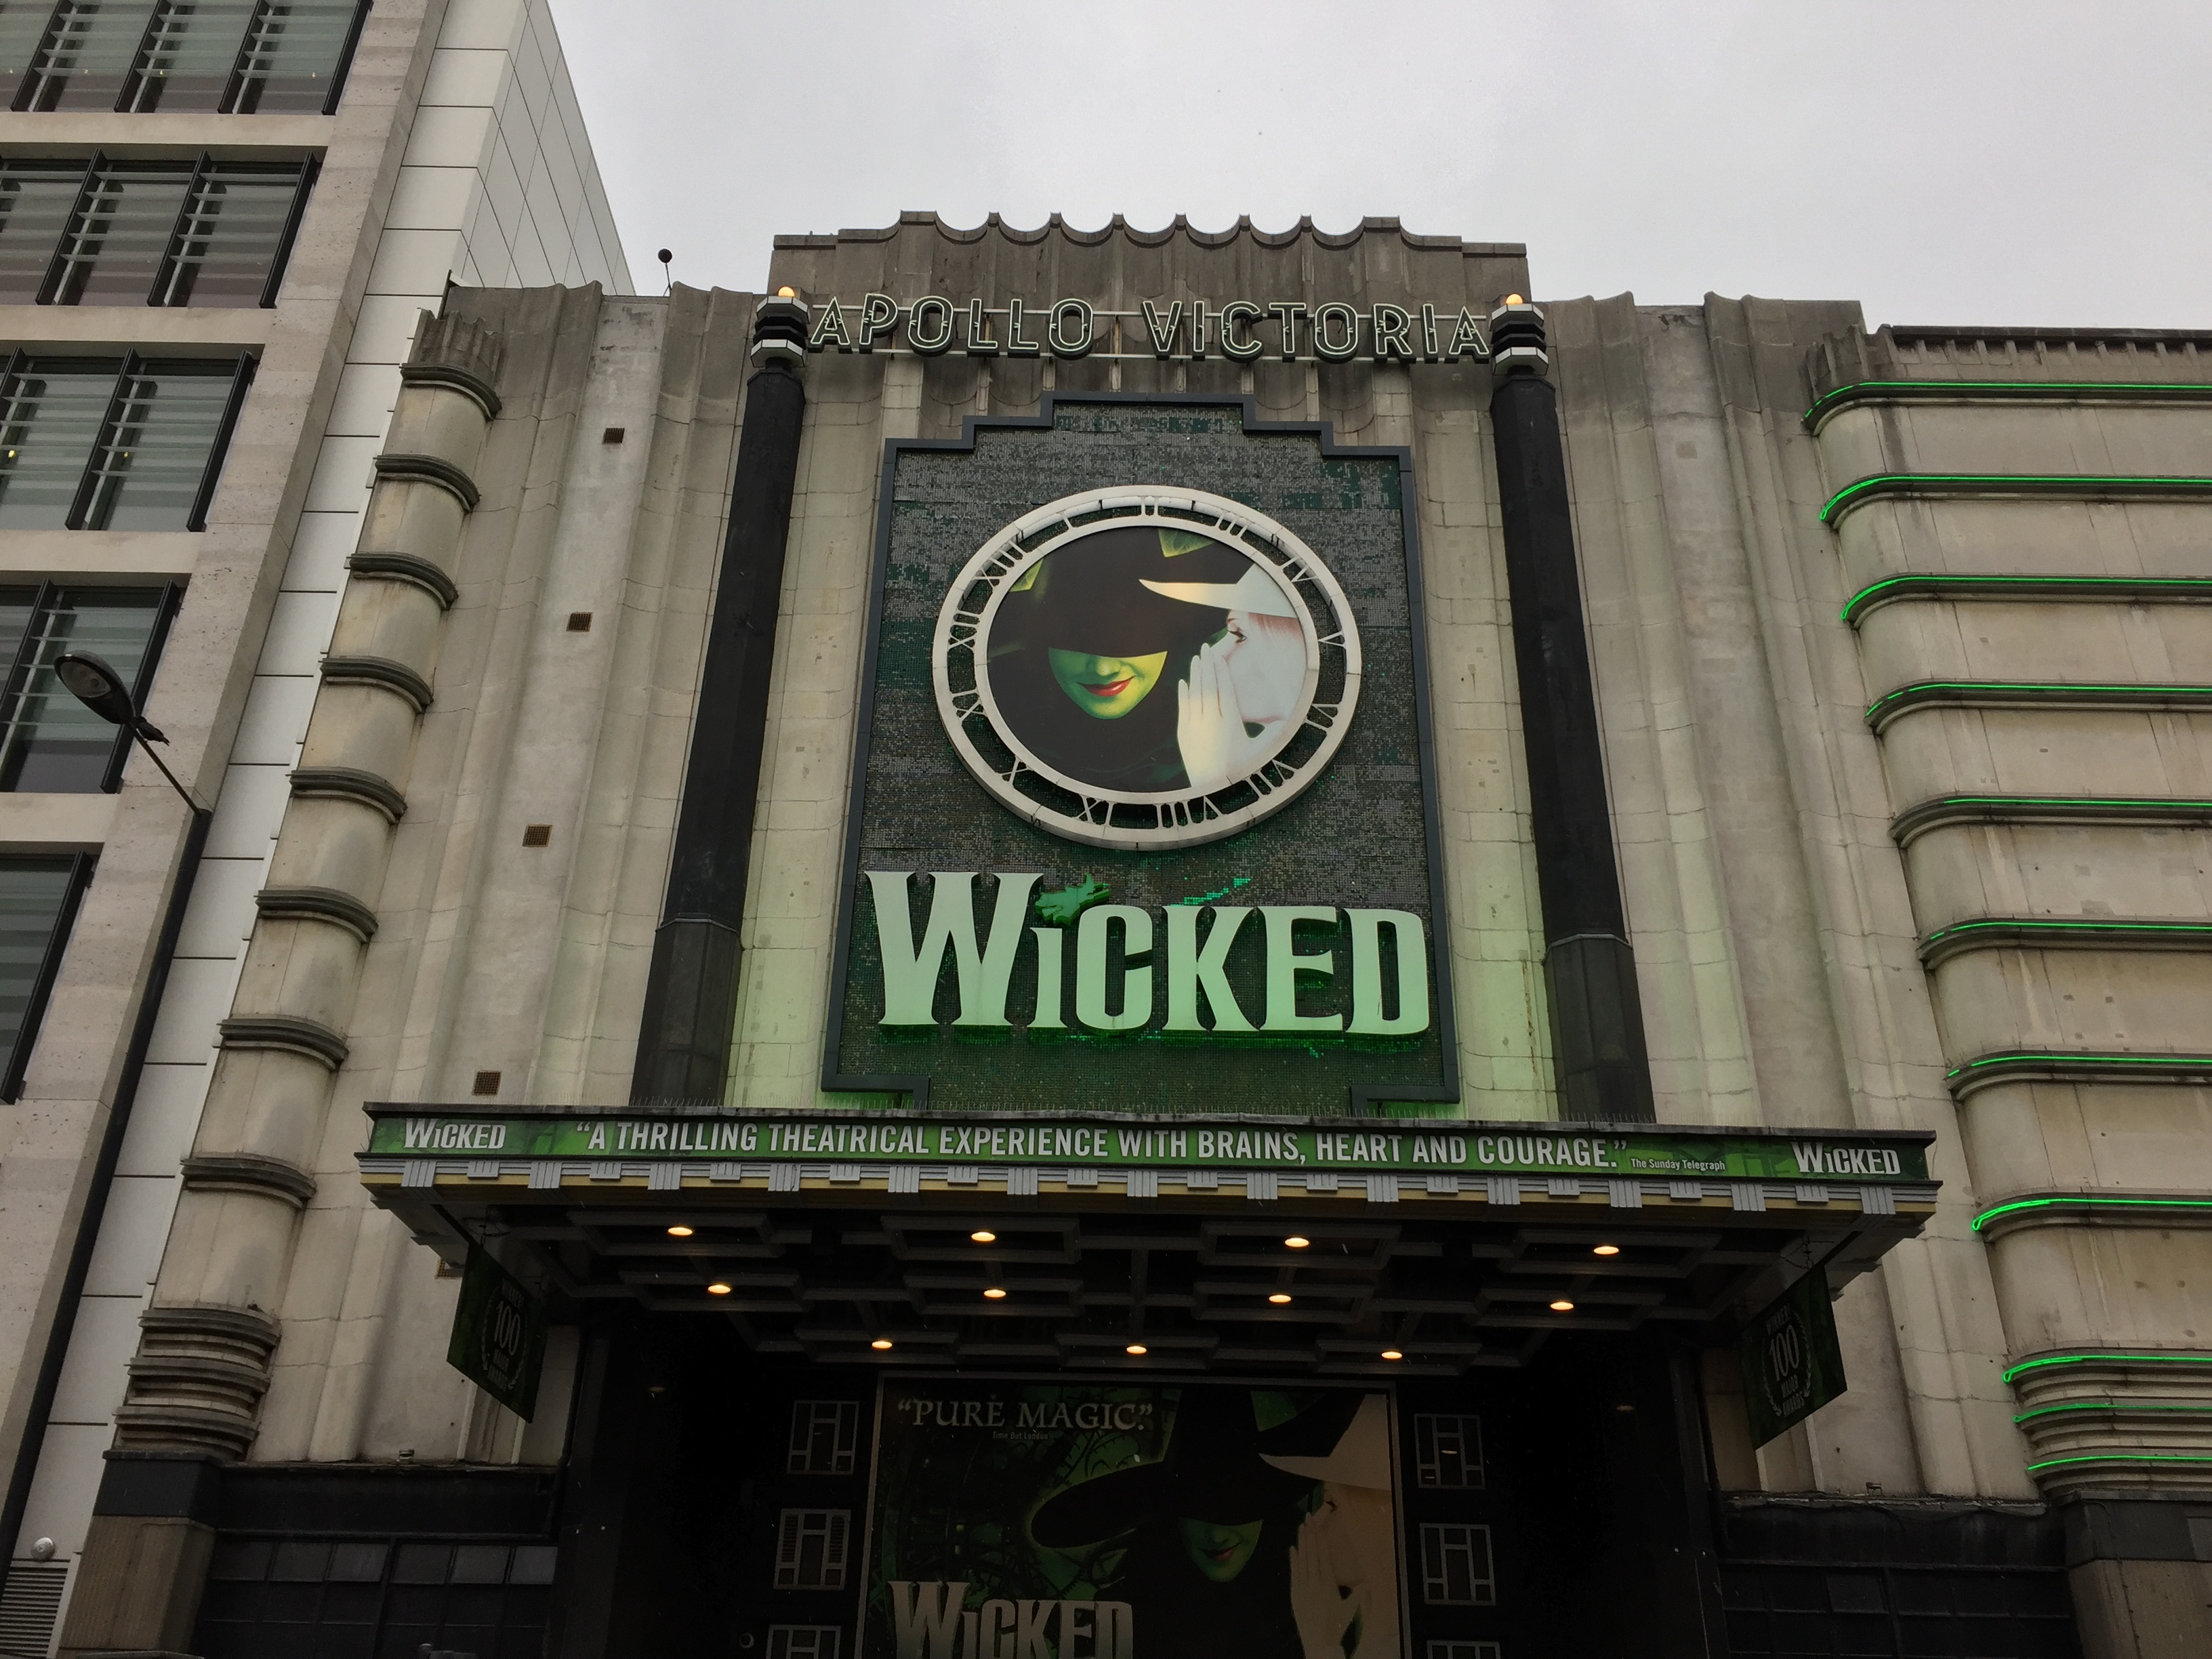 Wicked sign above the Apollo Victoria Theatre, with Elphaba, the green coloured Wicked Witch of the West, in the middle of a clock face, above the show's title in large letters. Along the front of the narrow canopy above the theatre entrance is white text on a green background, which reads: 